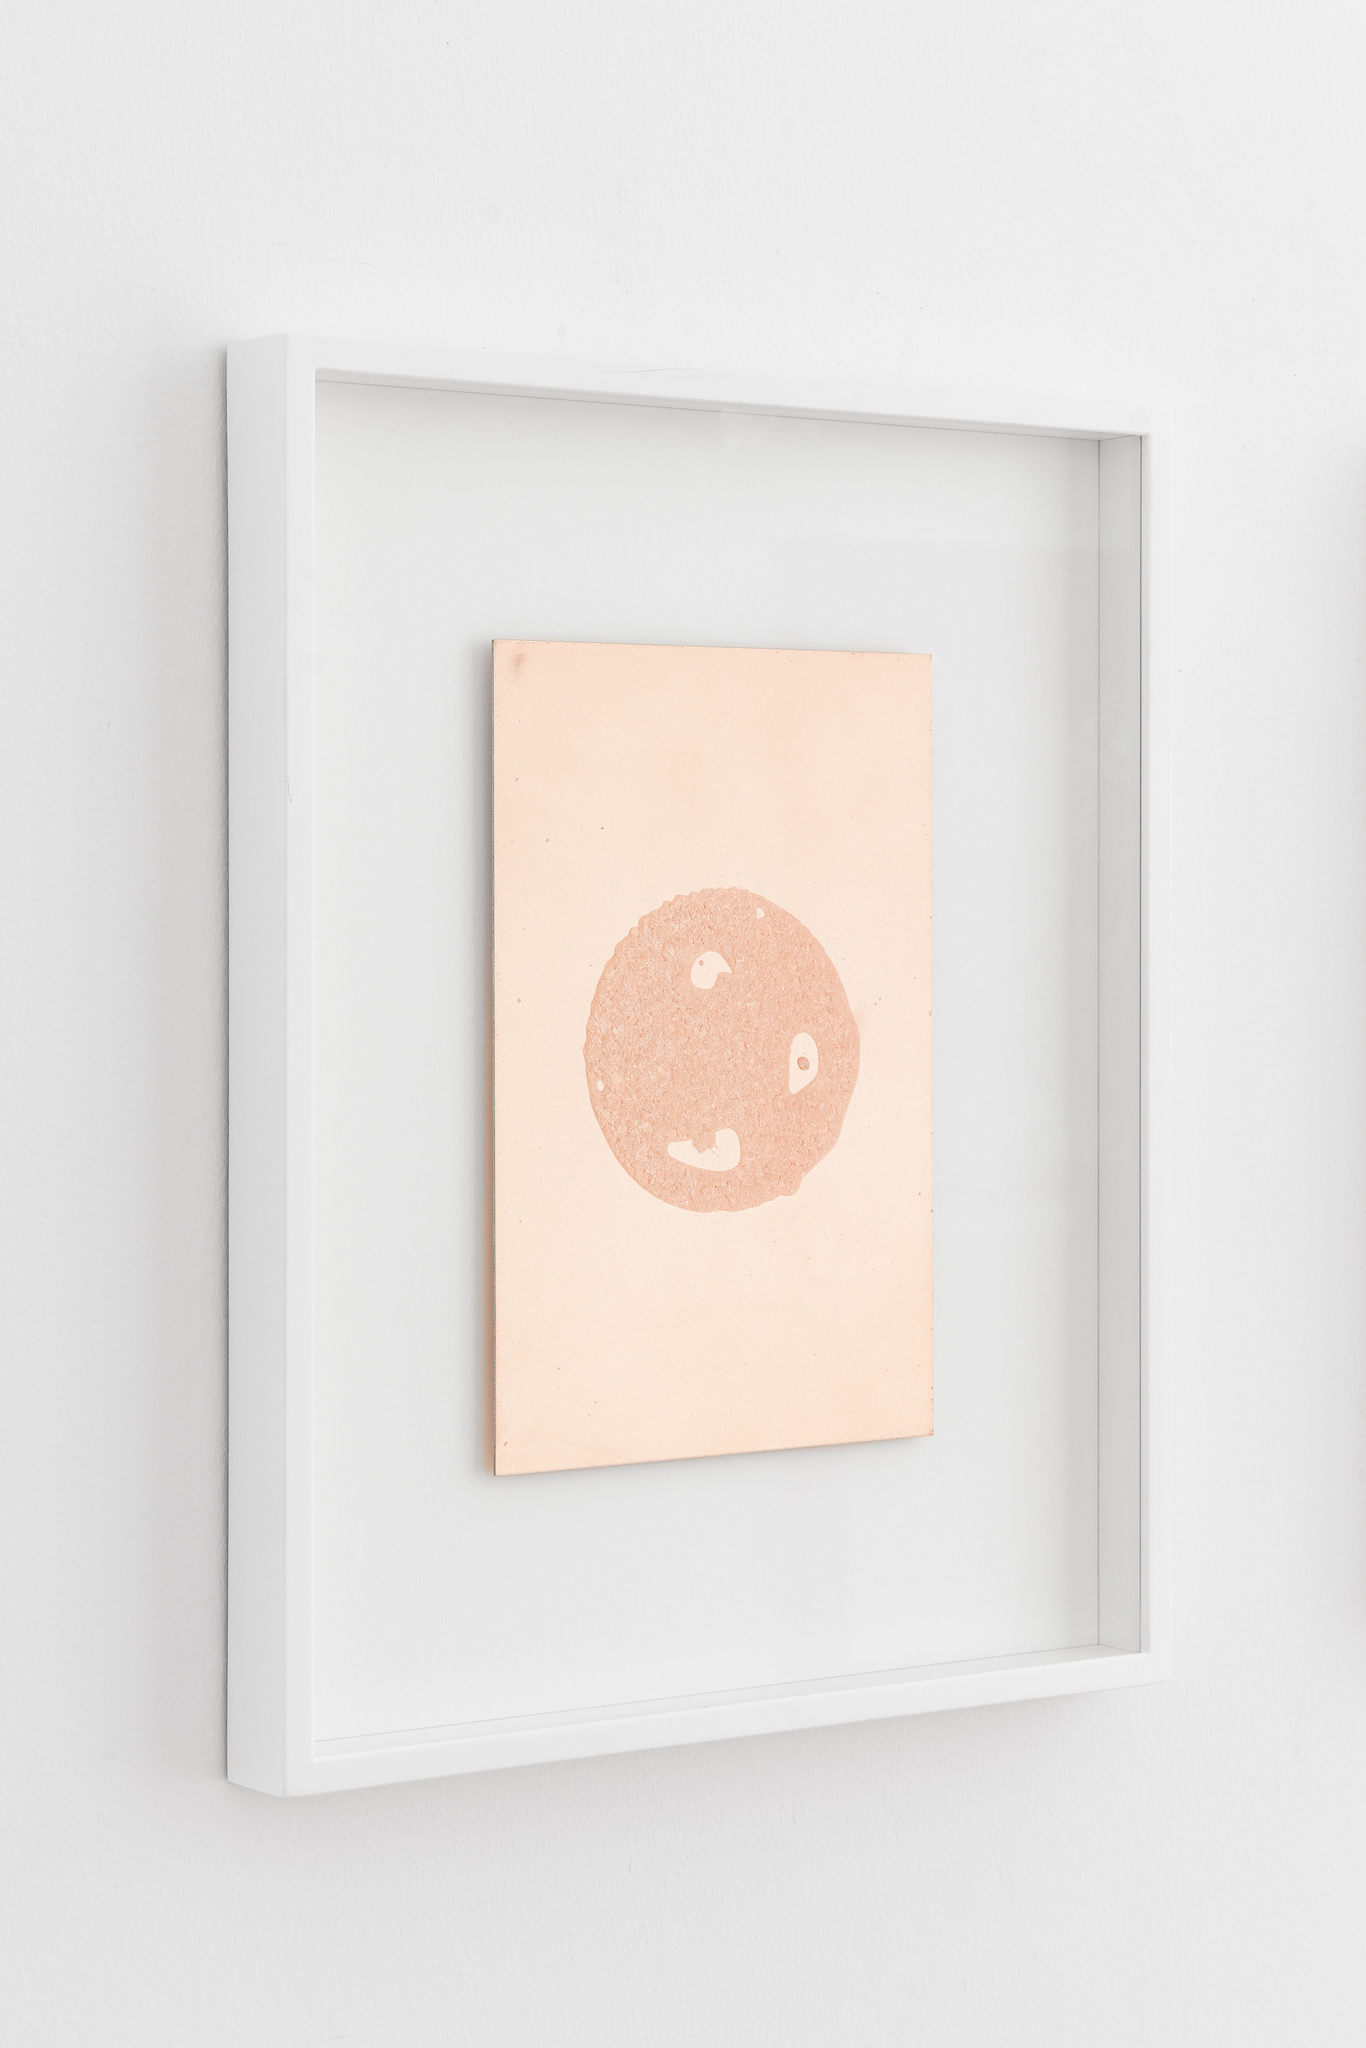 Haroon Mirza, Sugar Face, 2017, Refined sugar electroetching on copper PCB blank 51 x 40.5 x 4cm | Courtesy of max goelitz | Copyright of the artist